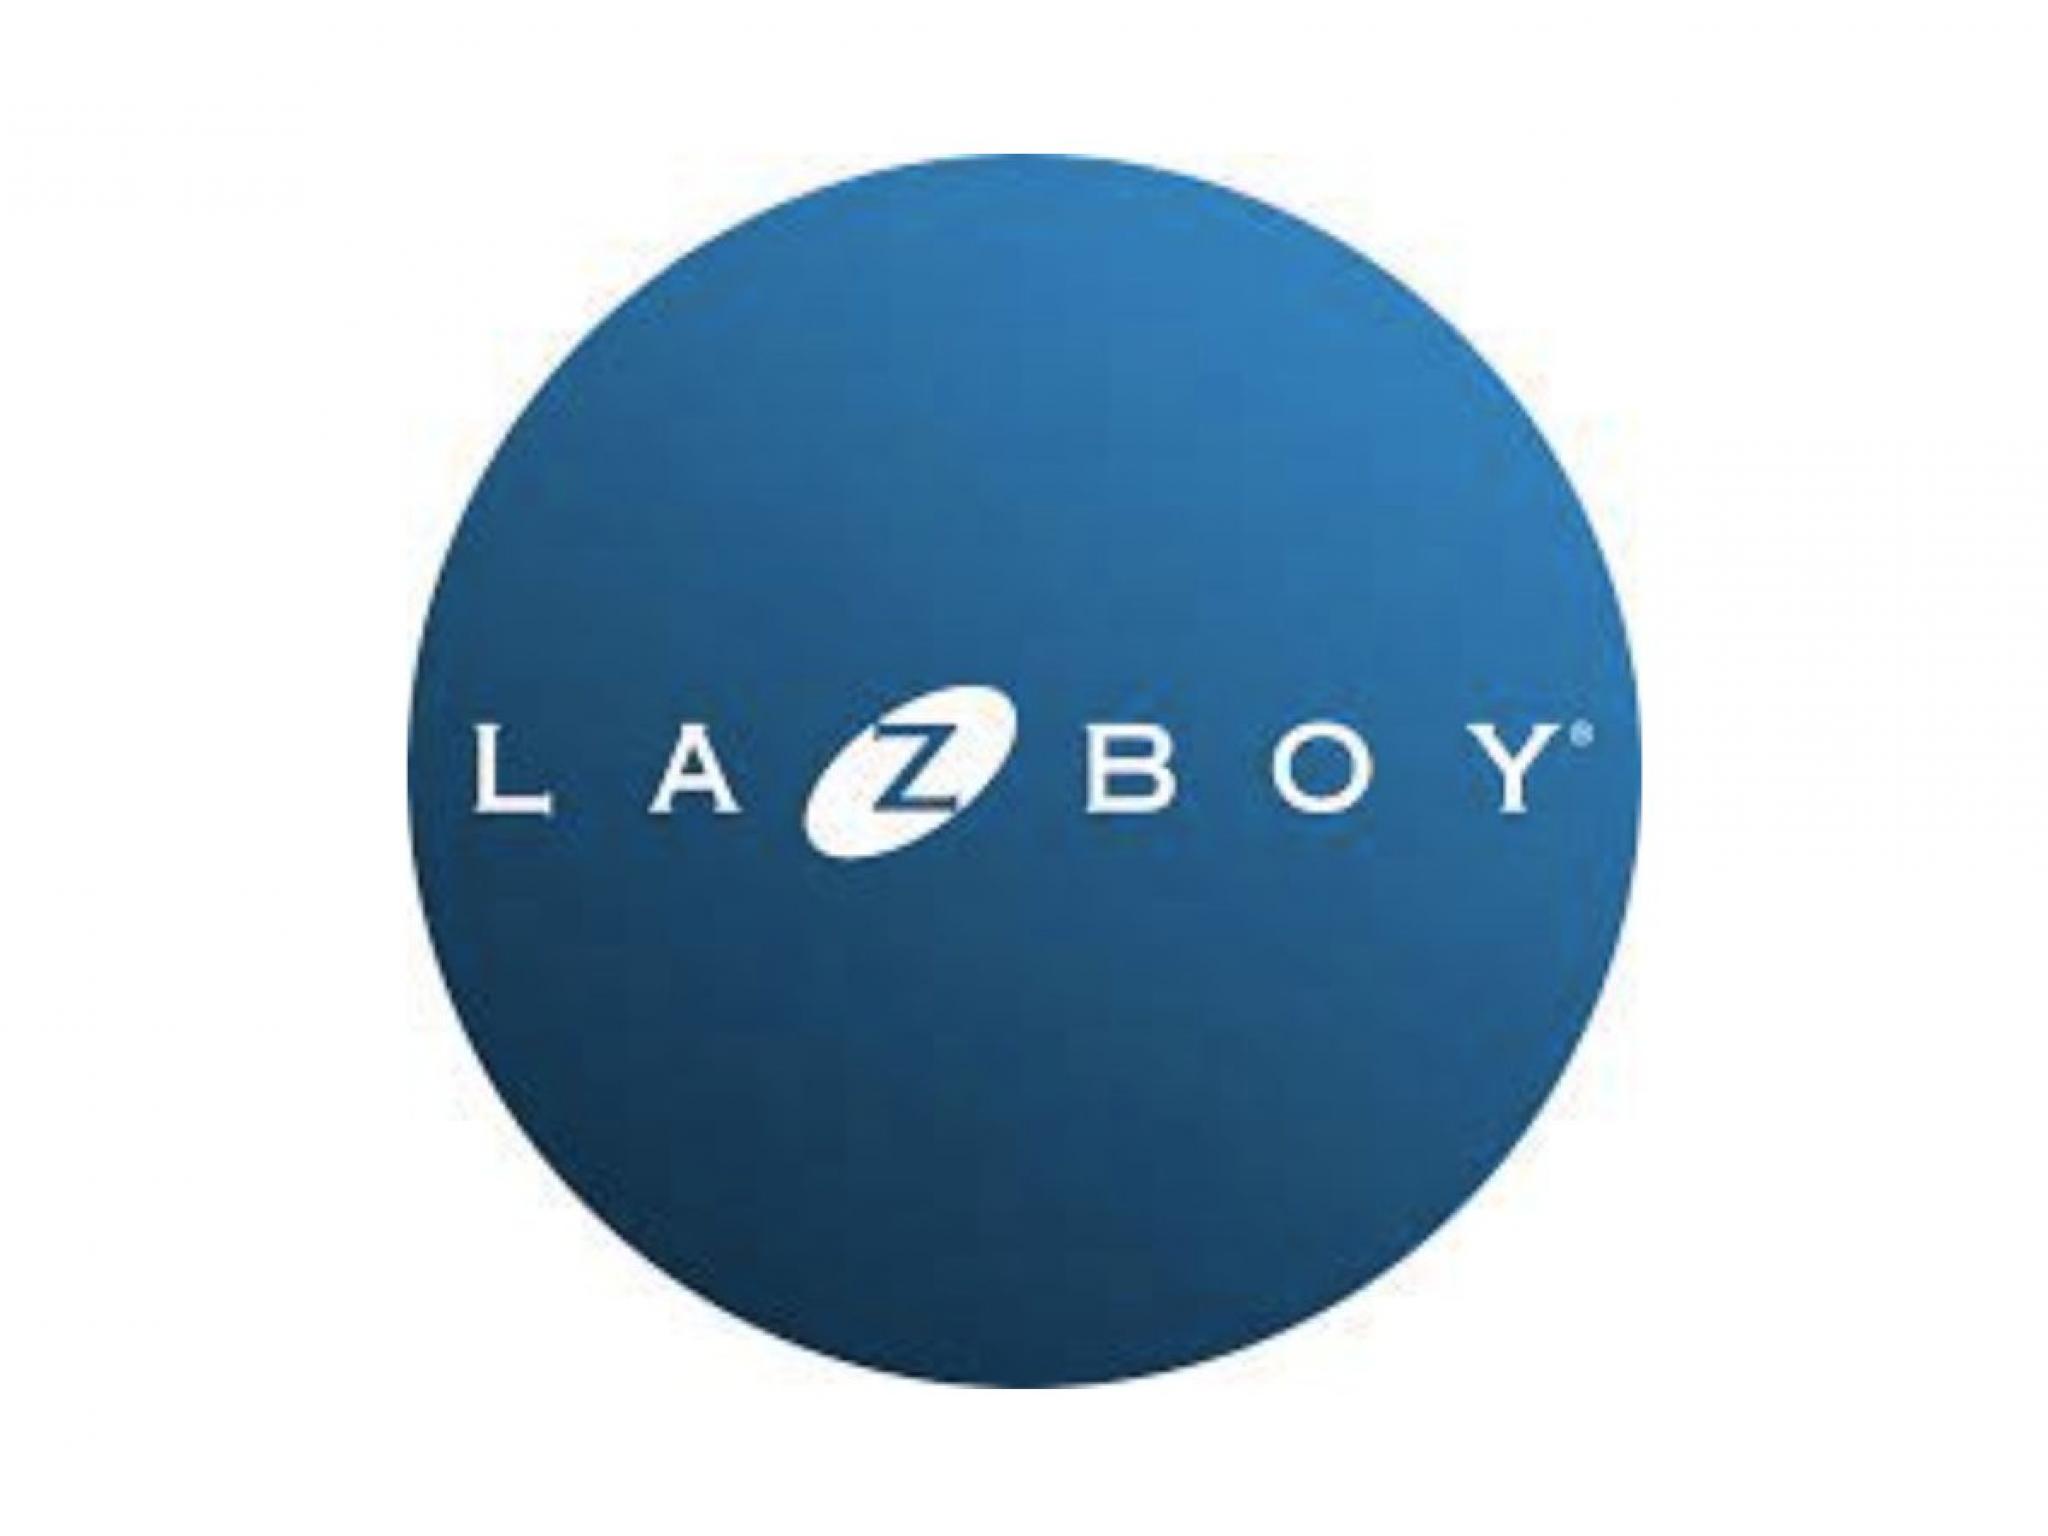  la-z-boy-posts-upbeat-earnings-joins-victorias-secret-snowflake-and-other-big-stocks-moving-higher-on-thursday 